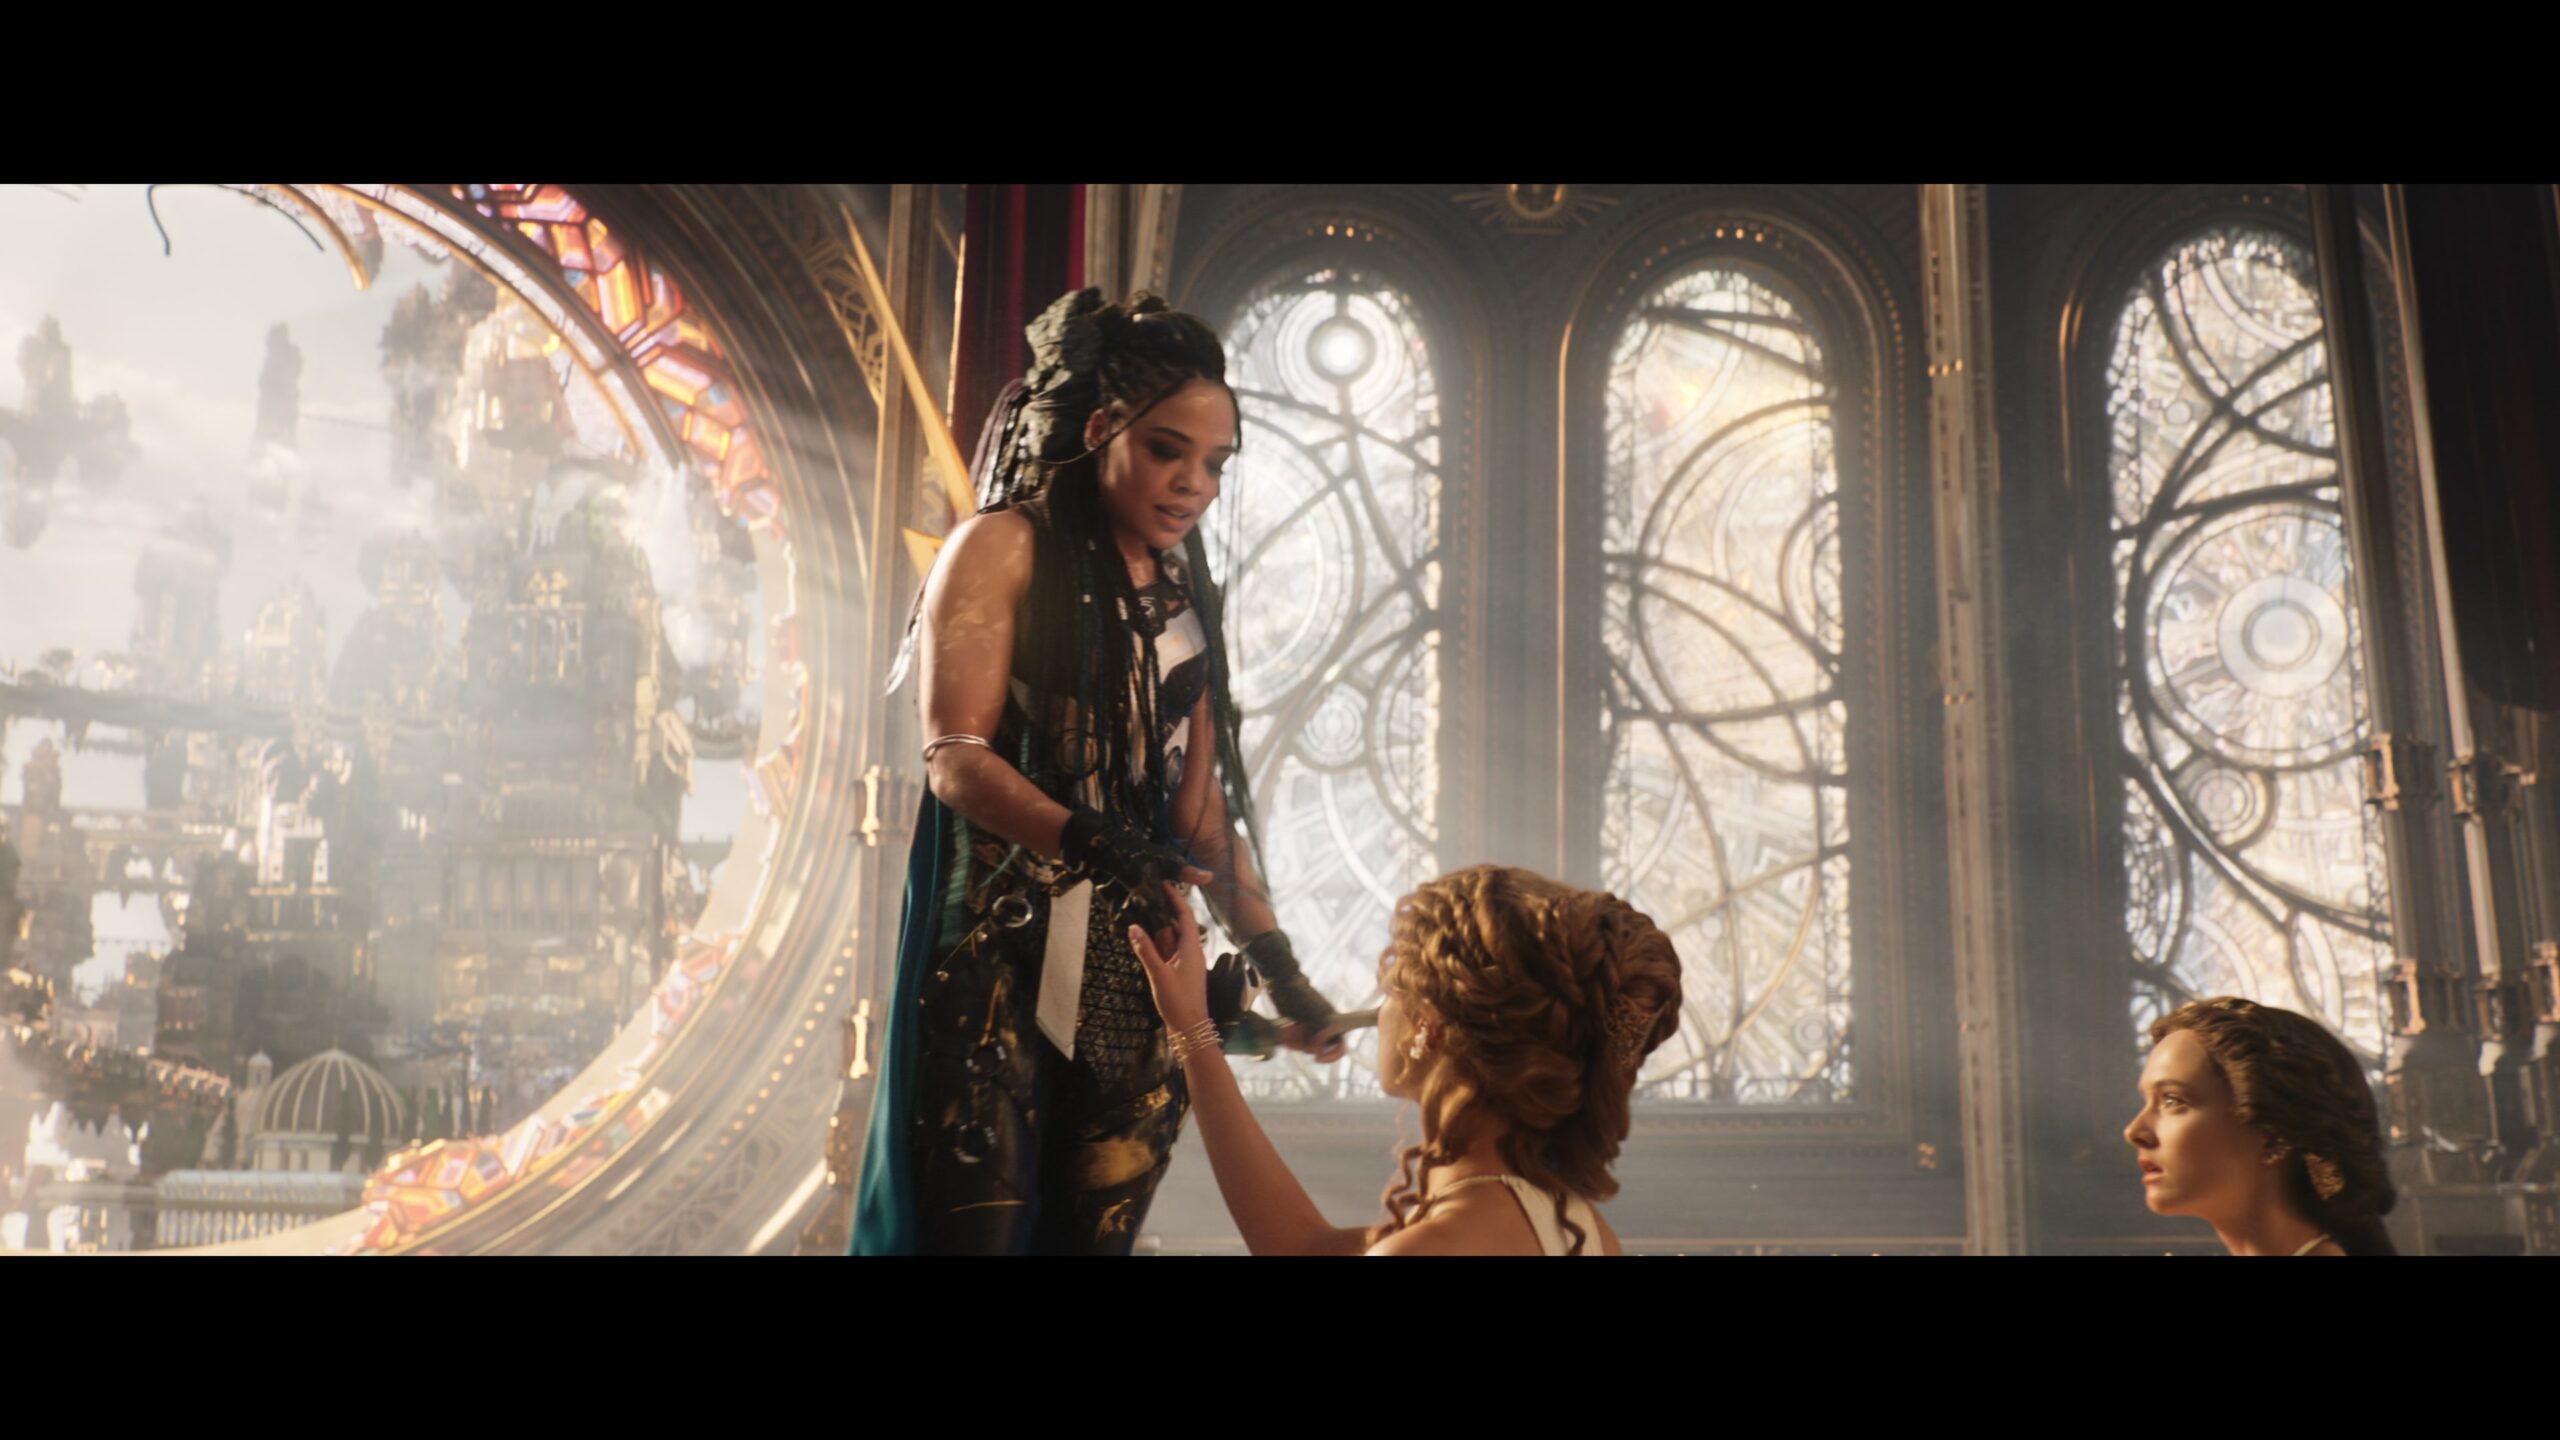 Valkyrie (Tessa Thompson) gives a flirty farewell to one of Zeus' (Russell Crowe) handmaidens in Thor: Love and Thunder (2022), Marvel Entertainment